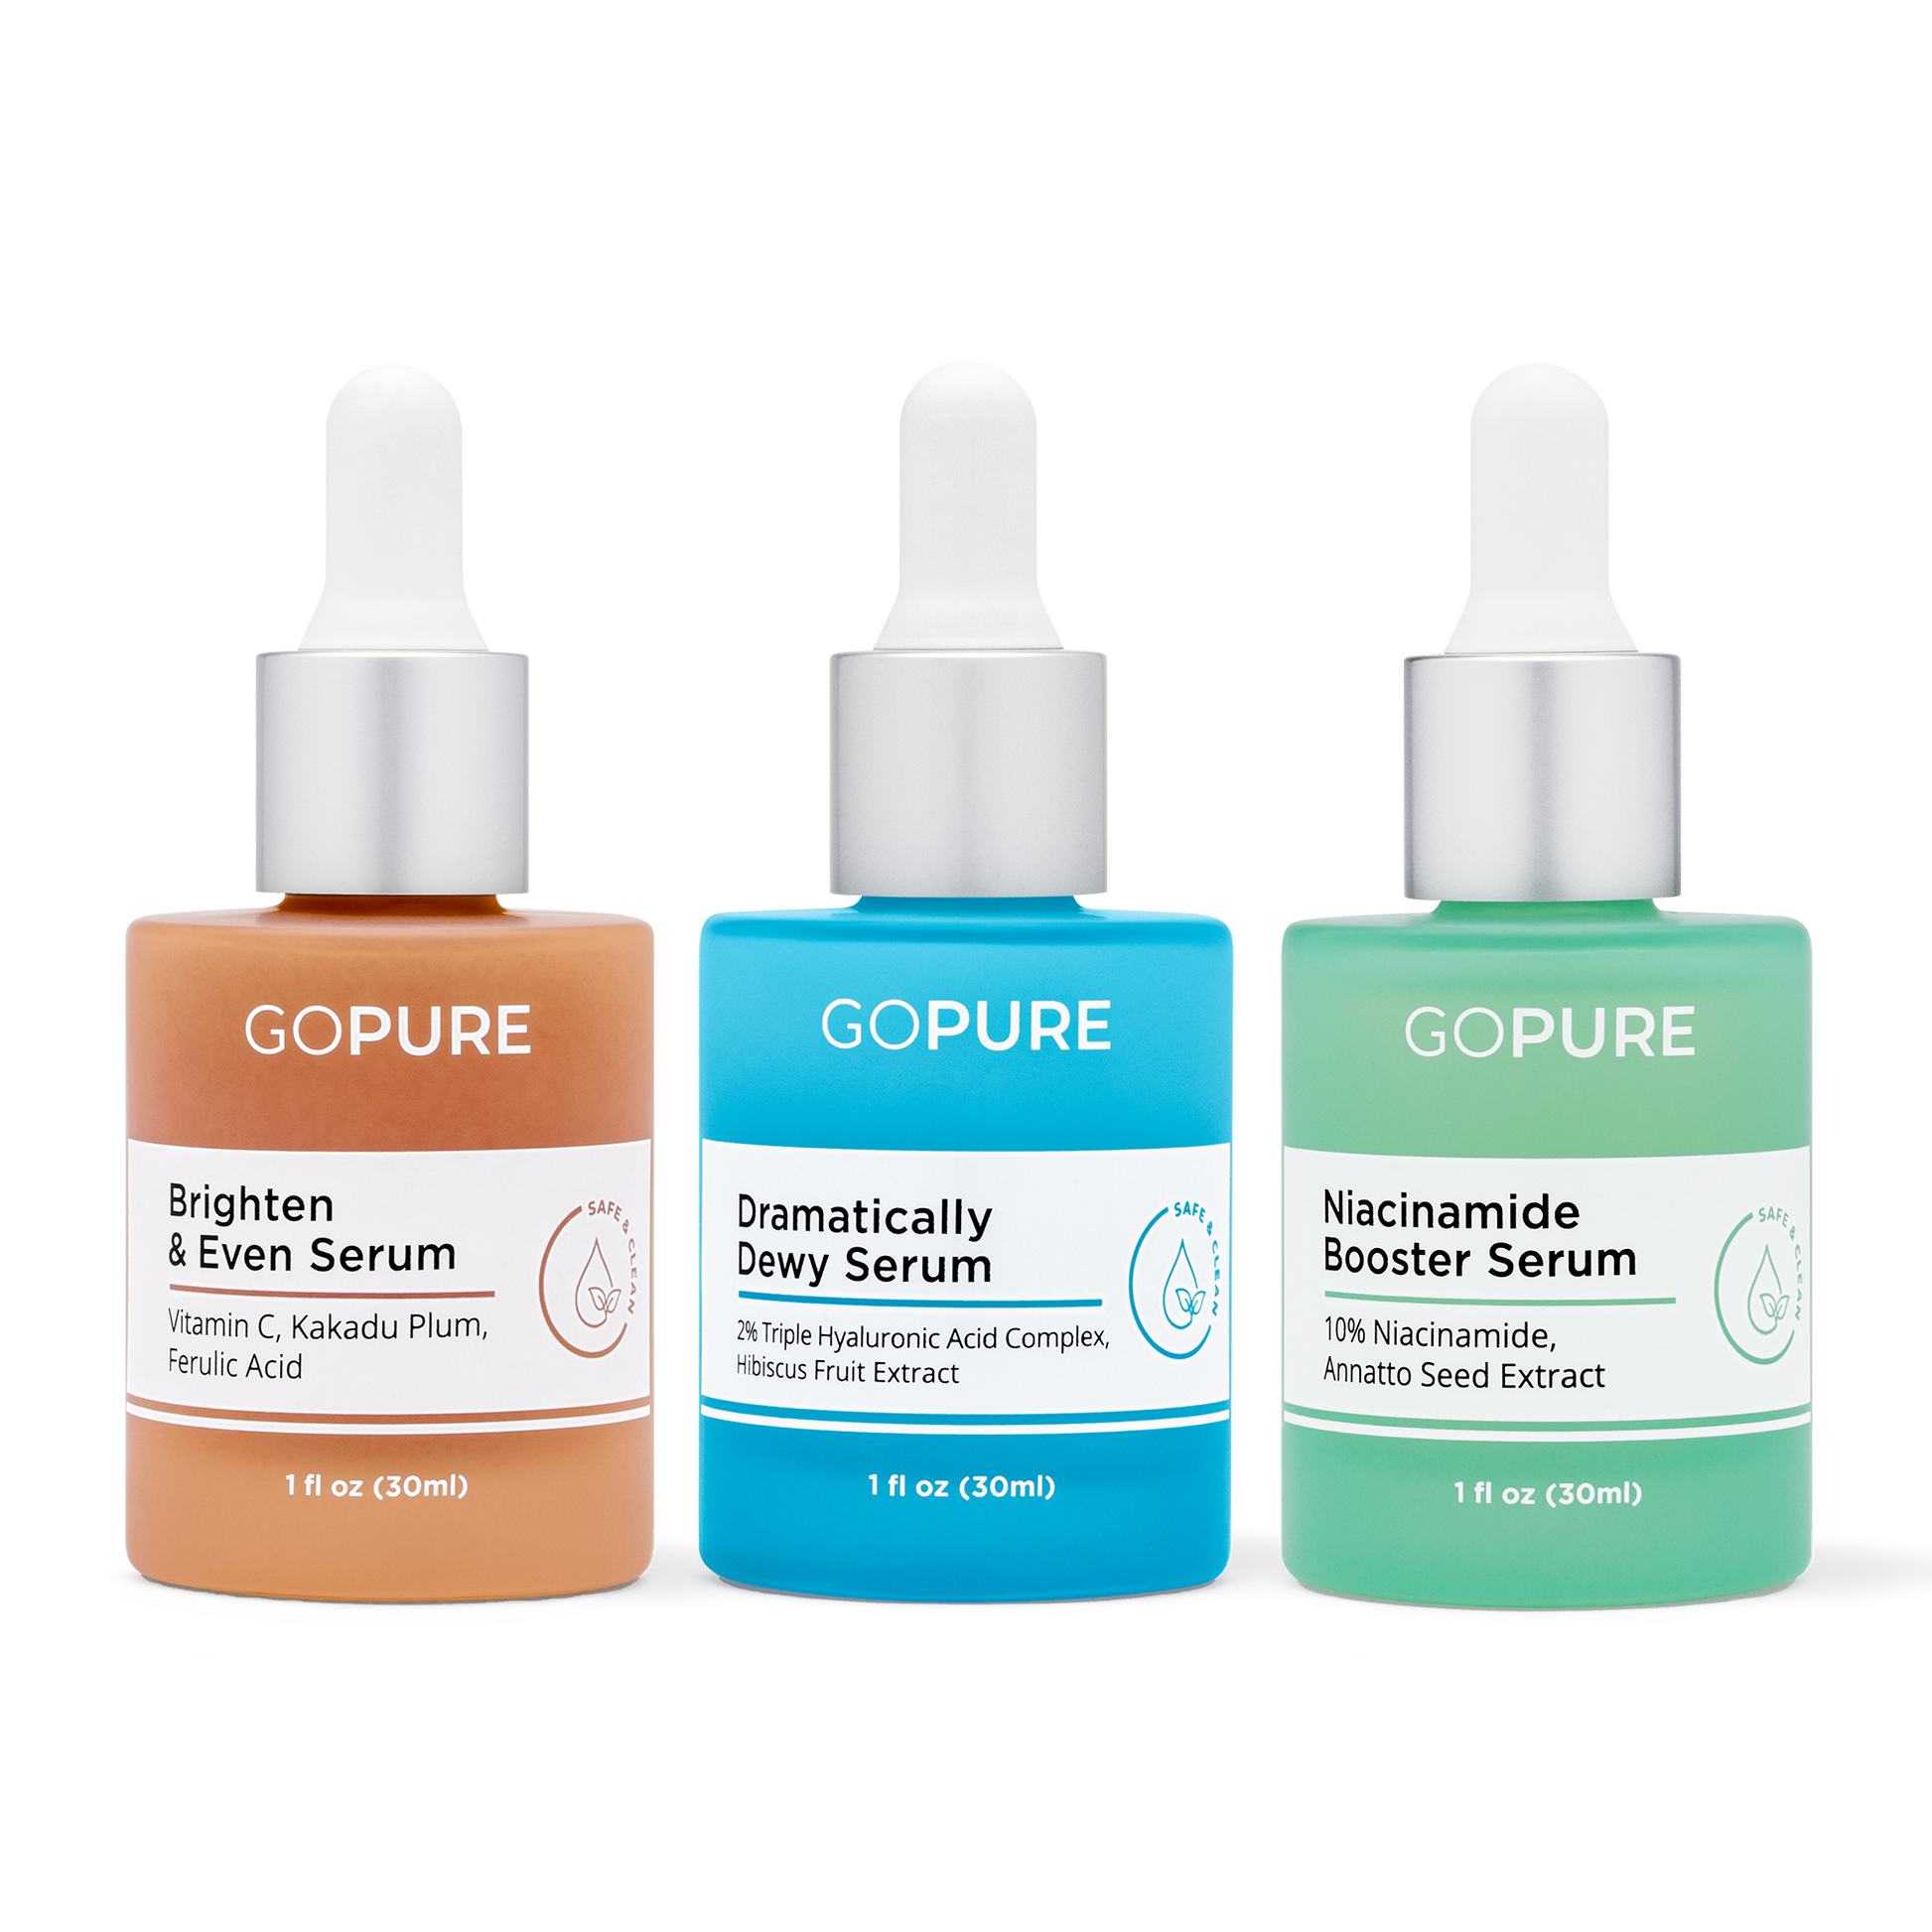 Image of three GoPure serum bottles: a peach-colored 'Brighten & Even Serum' with ingredients like Vitamin C and Ferulic Acid, a blue 'Dramatically Dewy Serum' with ingredients like Hyaluronic Acid, and a green 'Niacinamide Booster Serum' with ingredients like Niacinamide and Annatto Seed Extract.